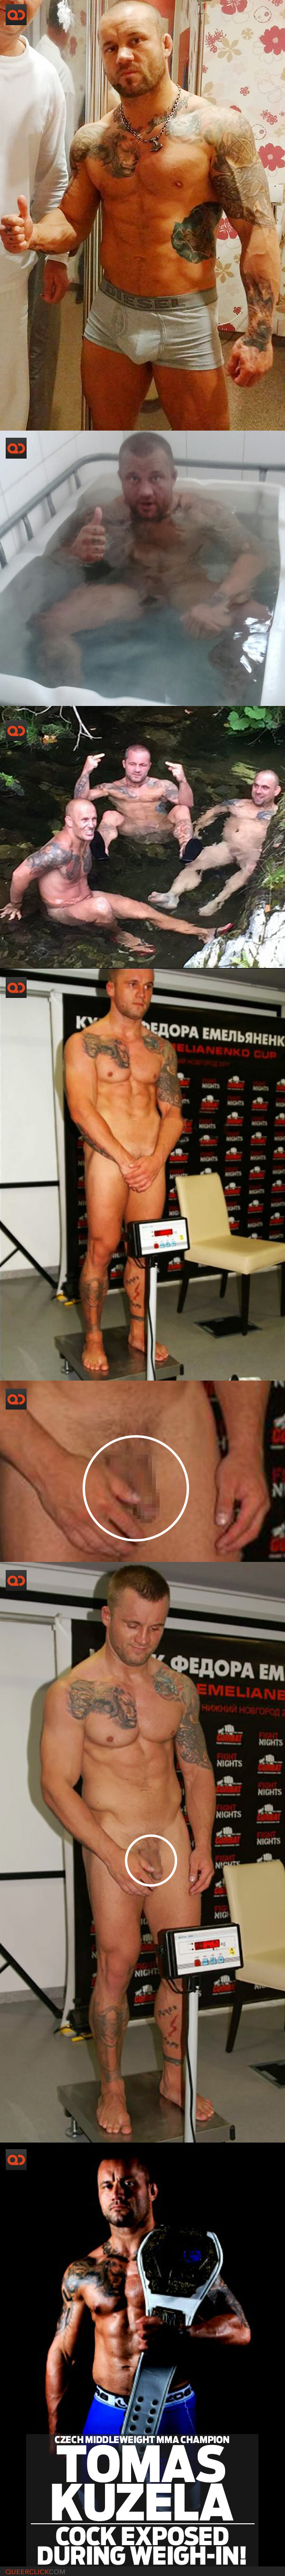 Tomáš Kužela, Czech Middleweight MMA Champion, Cock Exposed During Weigh-In!